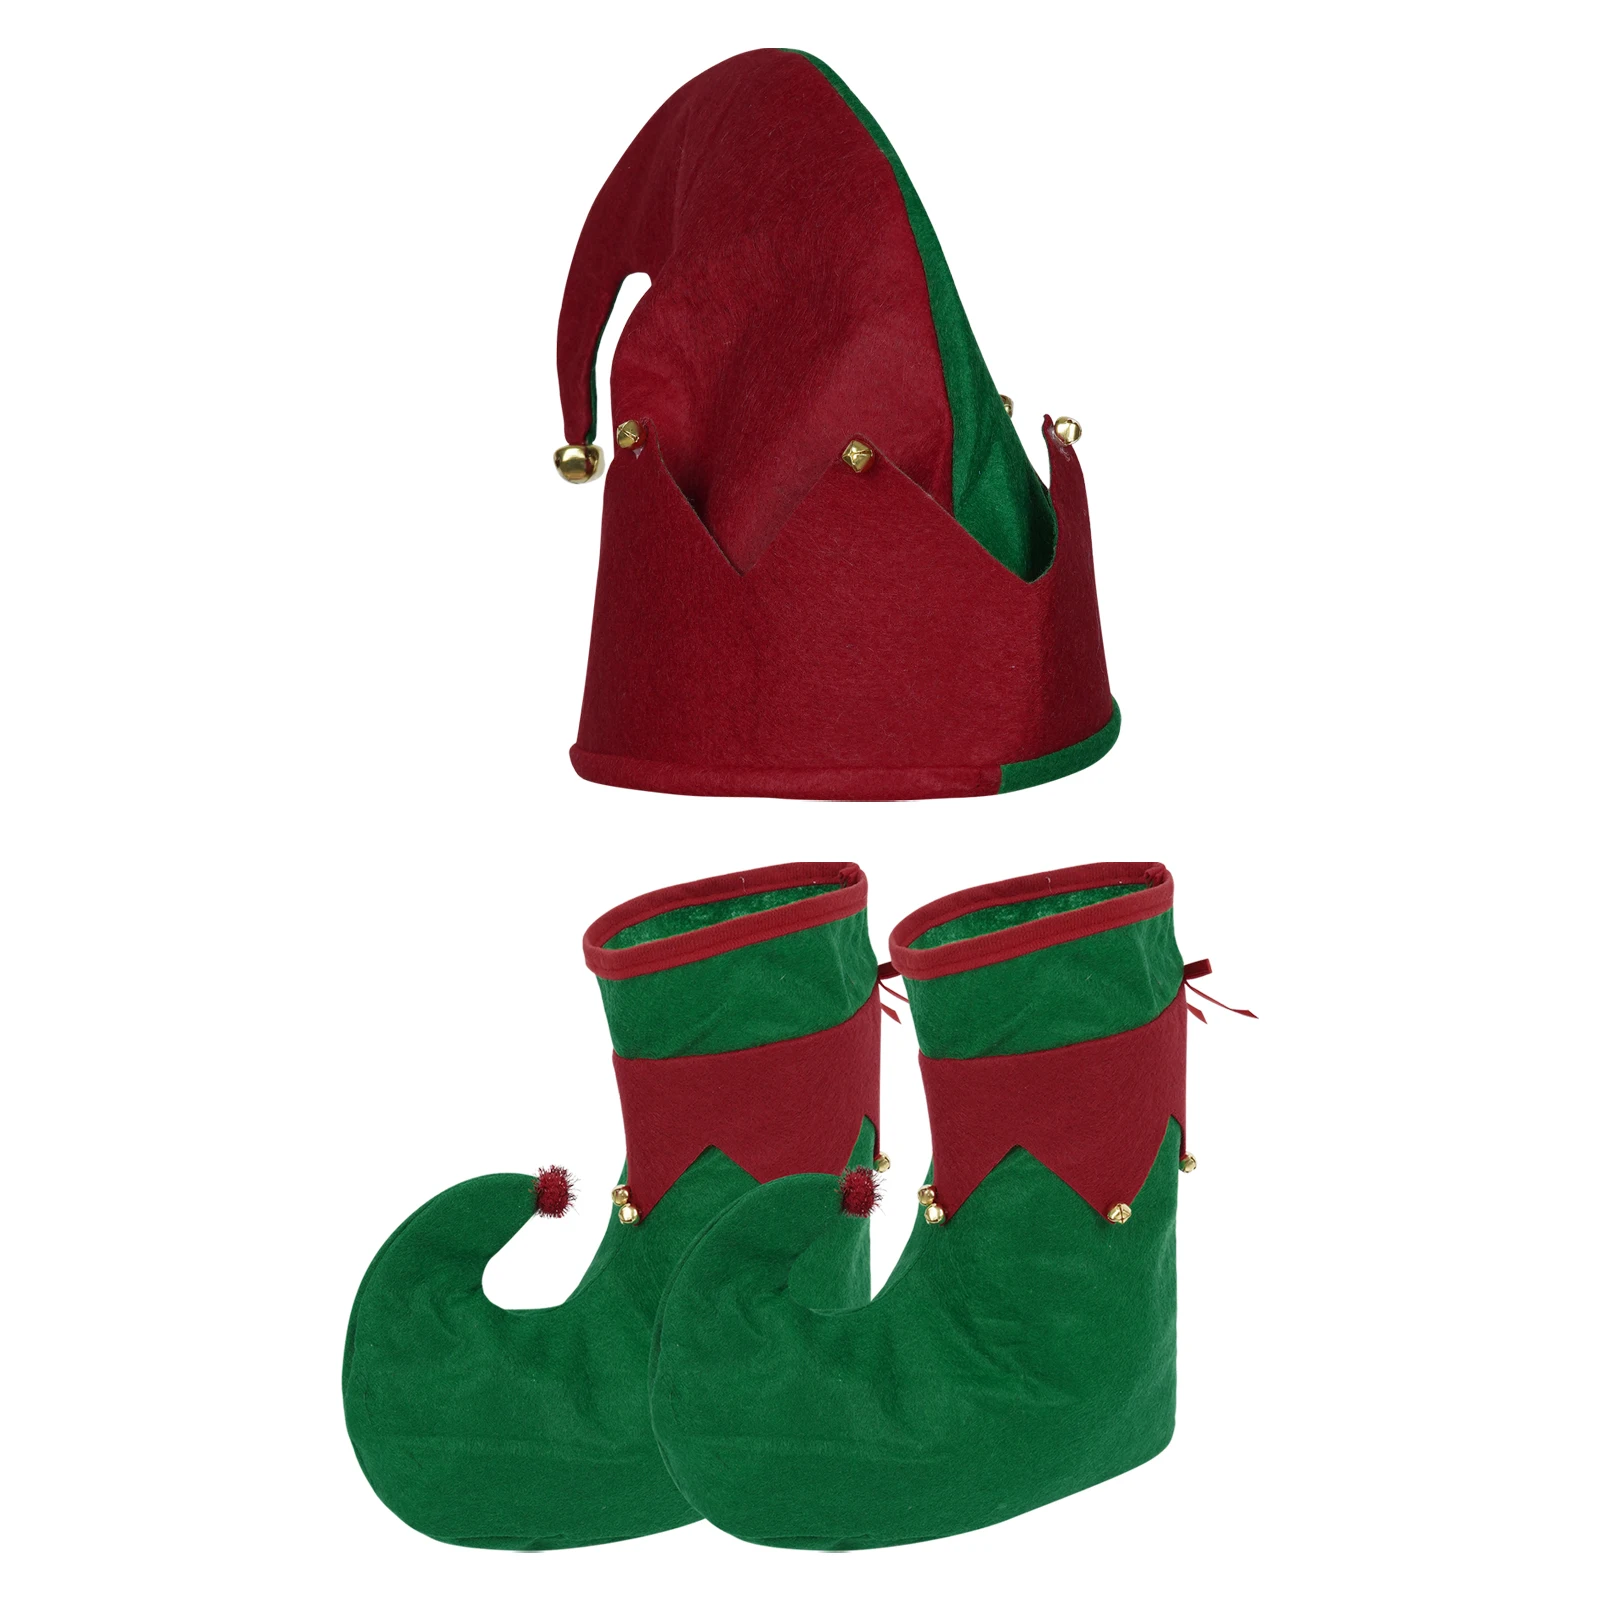 Novelty 2 Sided Red and Green Elf Hat with Jingle Bells by Clever Creations One Size Fits Most Christmas Hat for Both Kids and Adults 